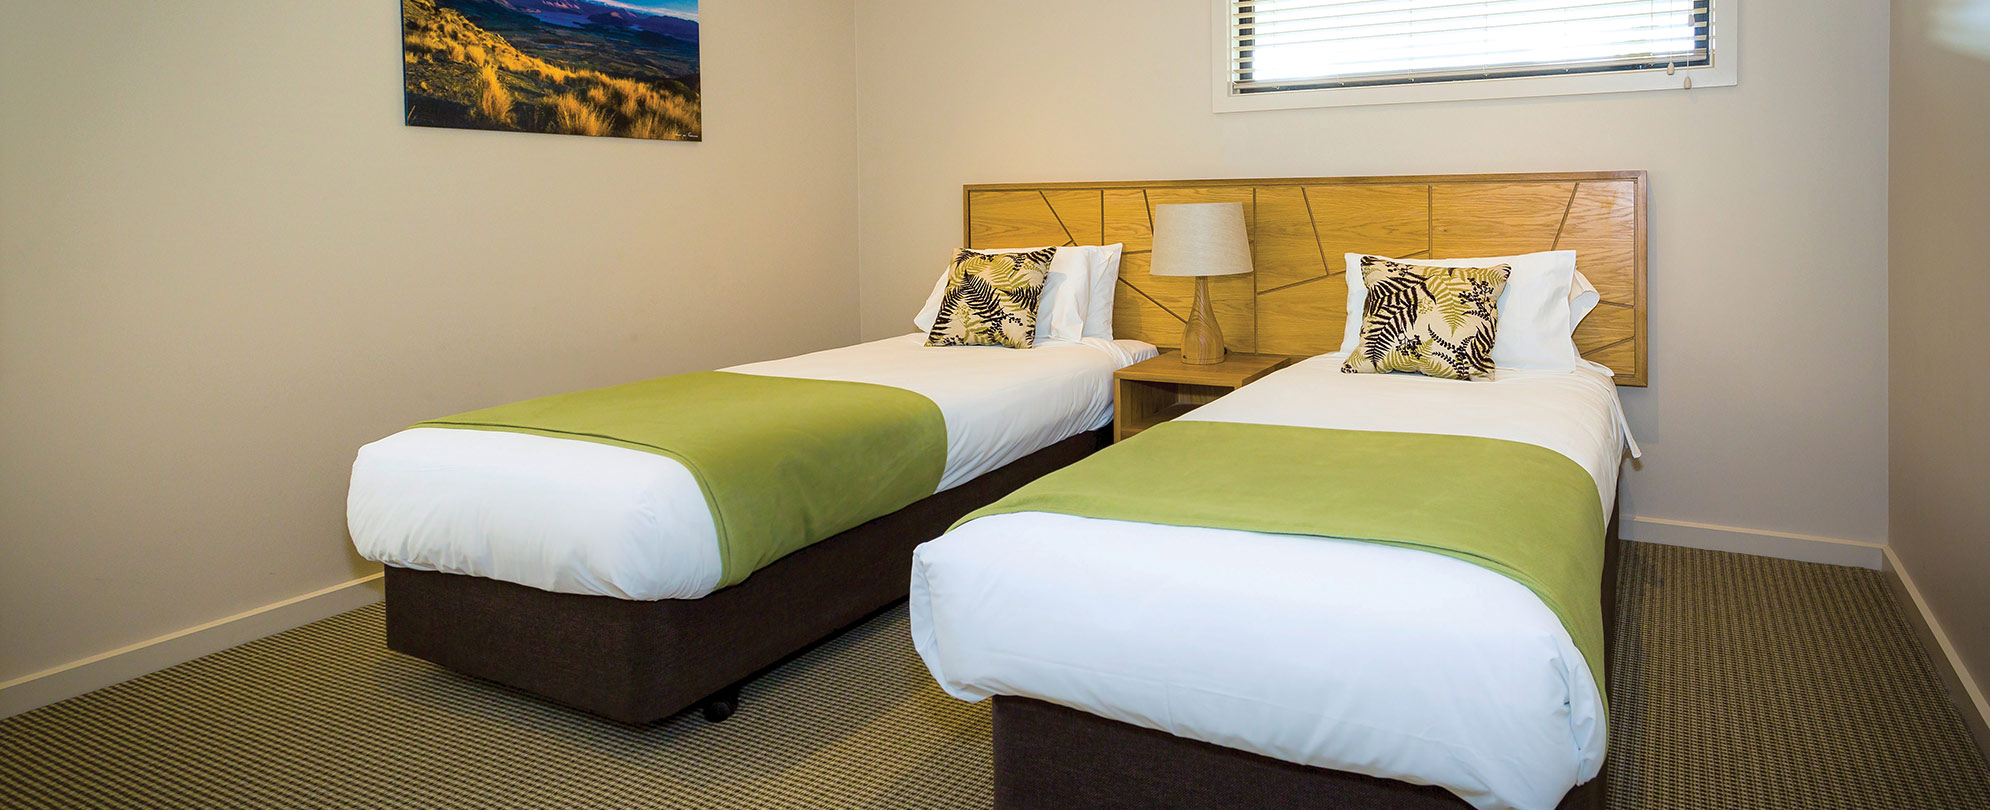 Two twin-sized beds in the third room of the 3-bedroom suite at Club Wyndham Wanaka.